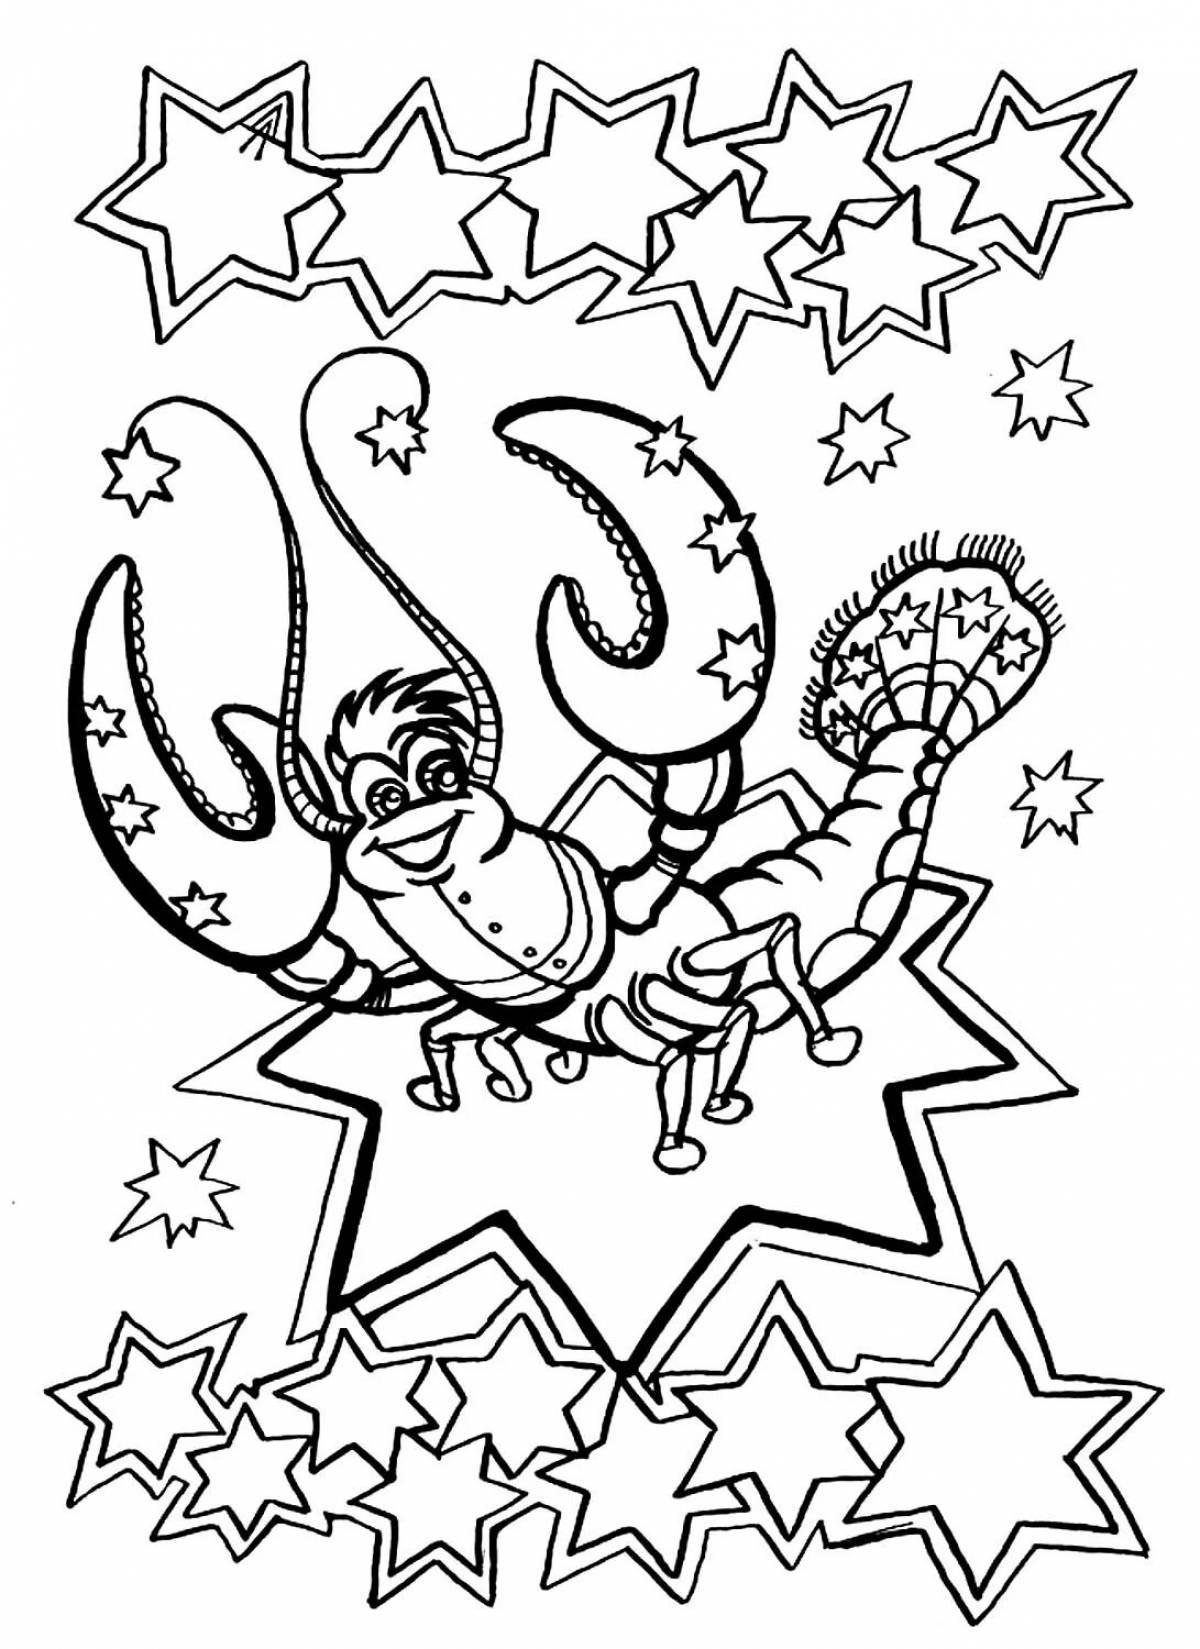 Detailed cancer coloring page